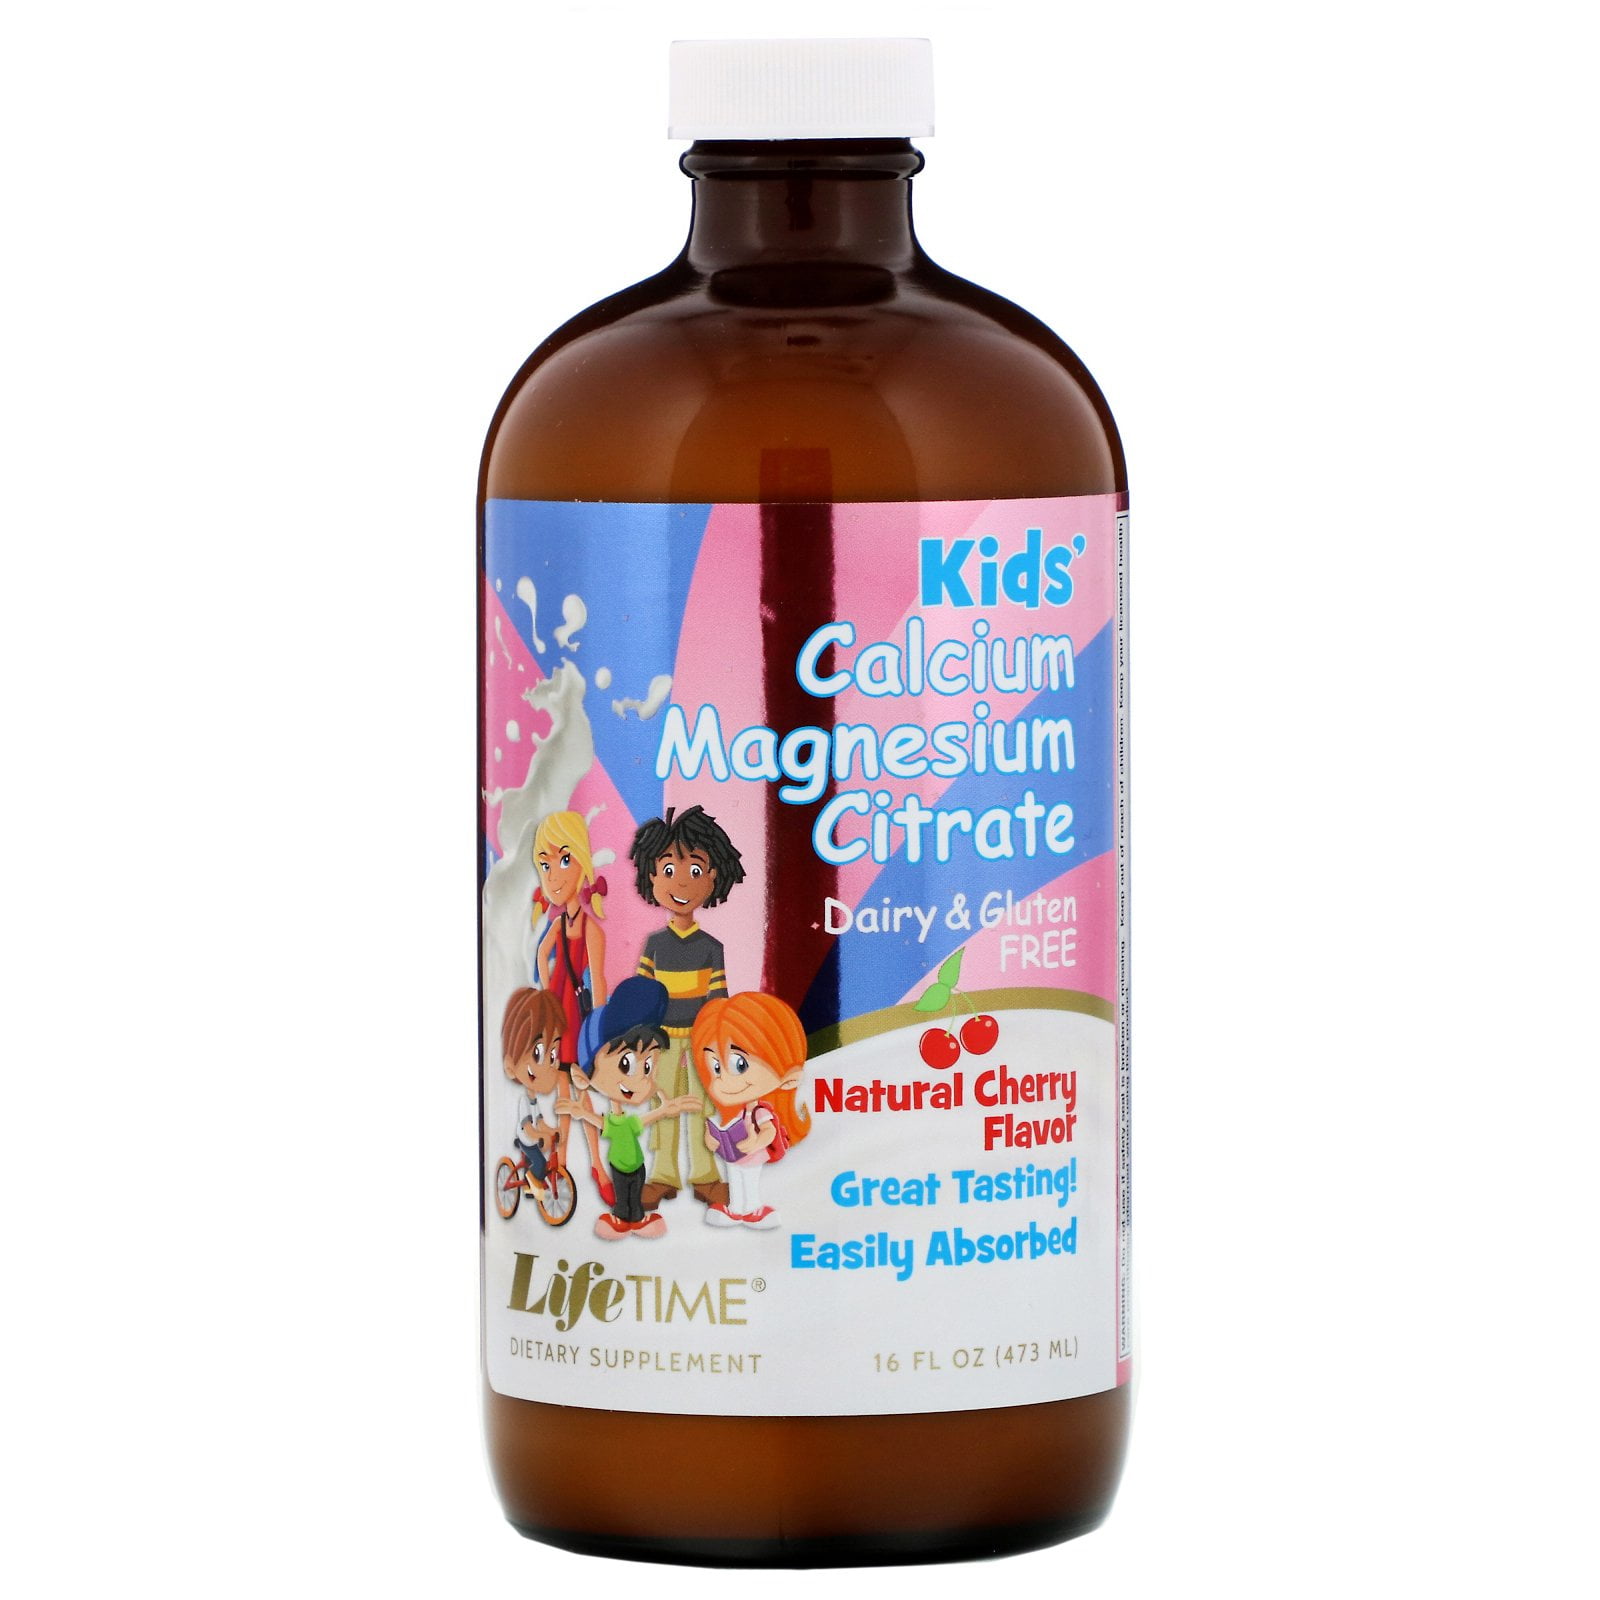 Lifetime Kids Calcium Magnesium Citrate Support Bone, Muscle & Teeth Health Easy Absorption